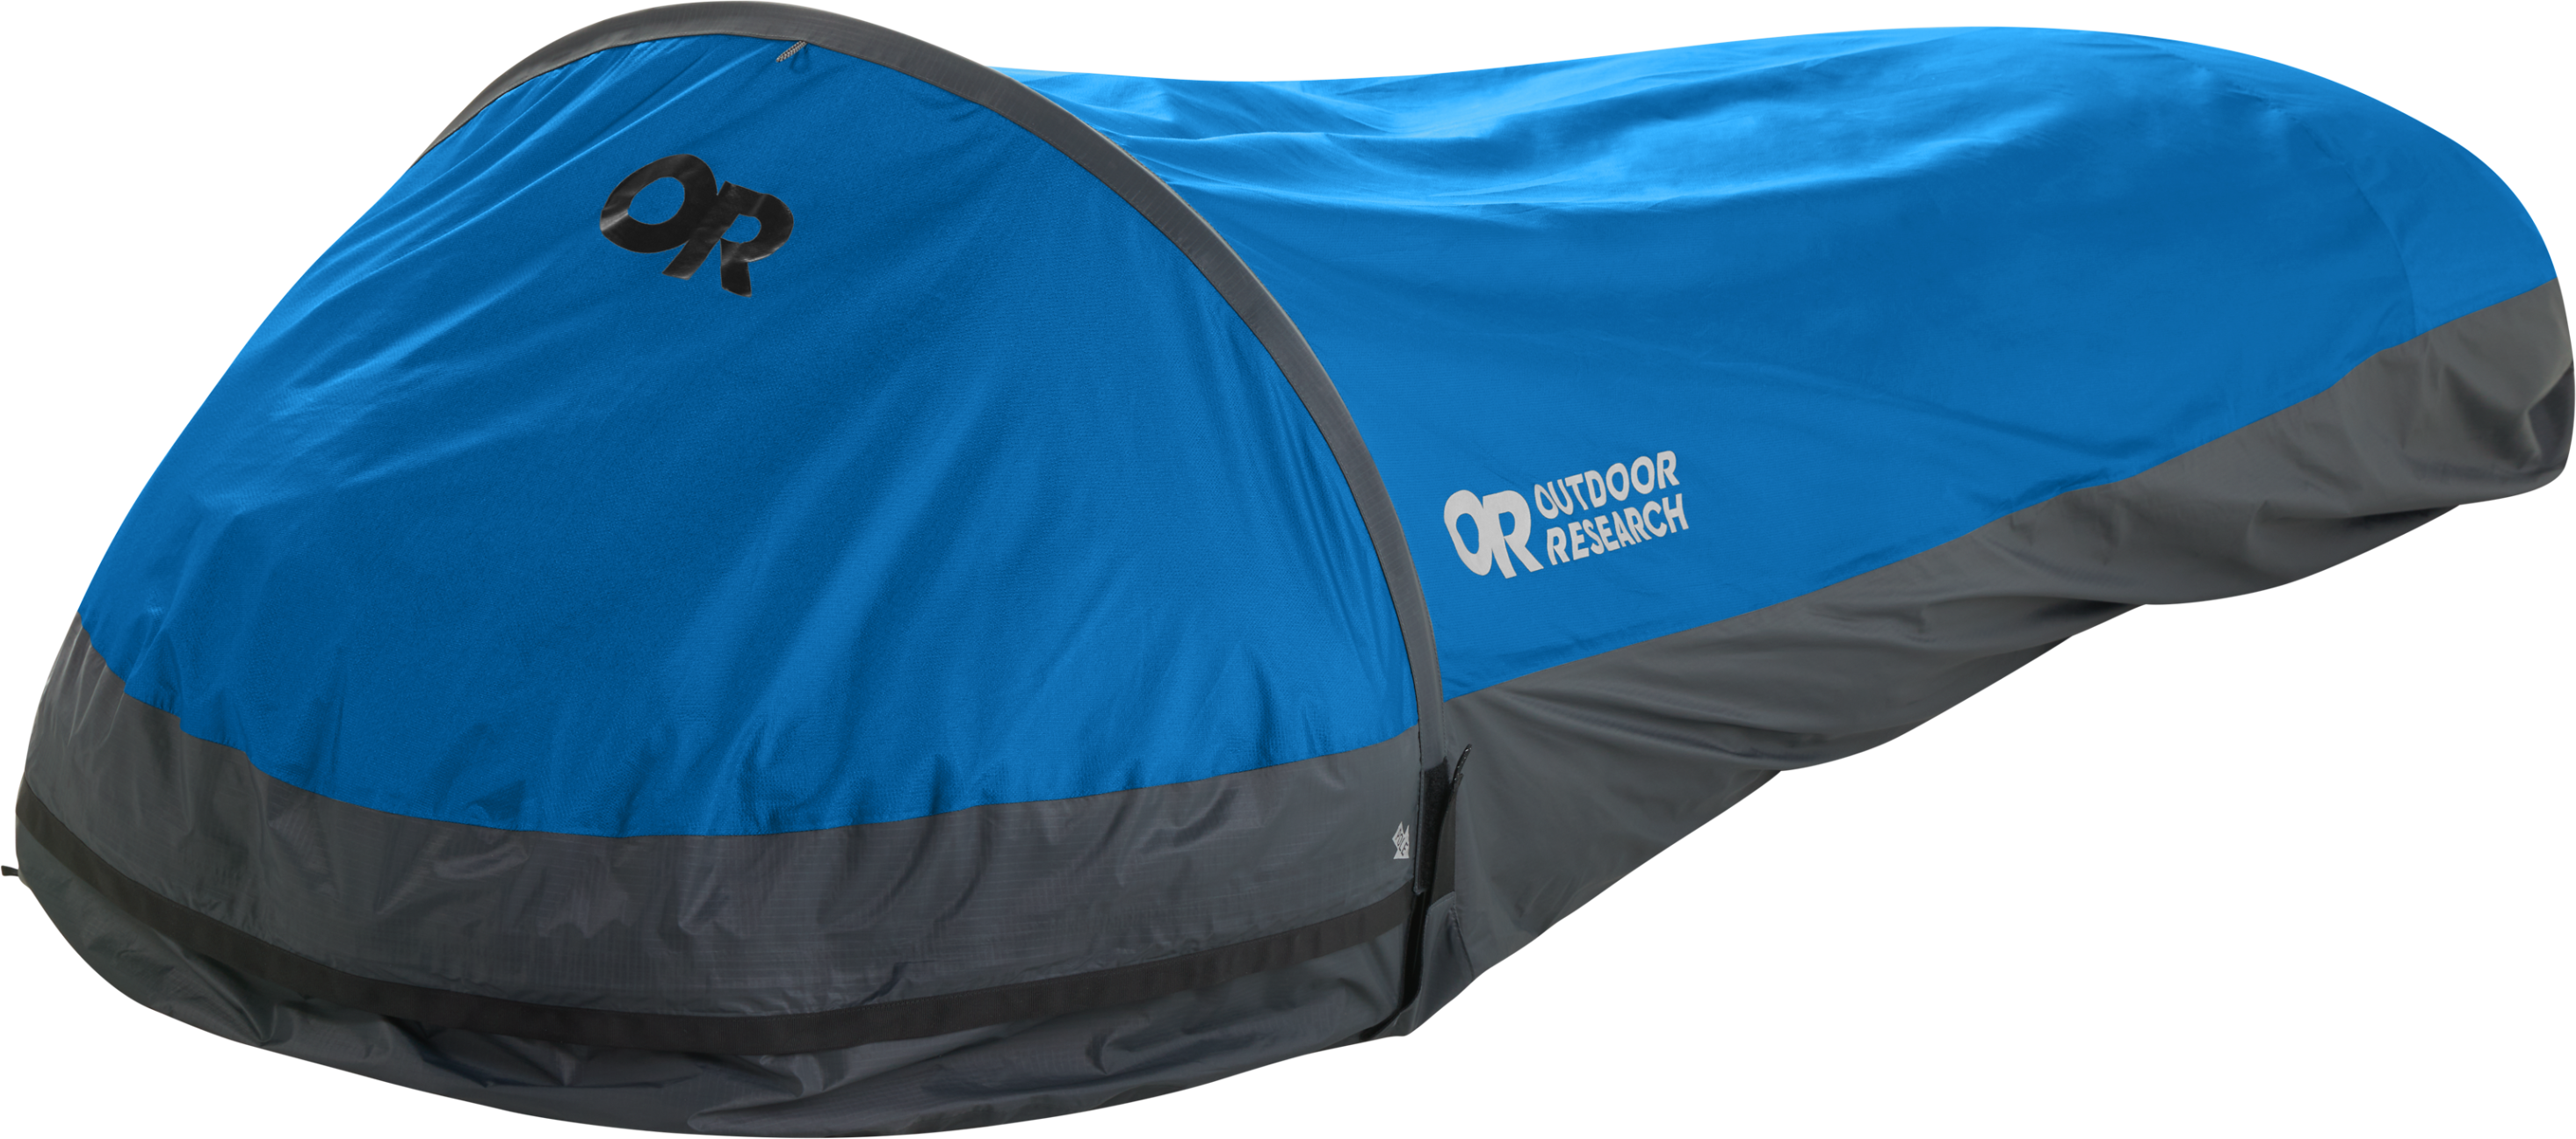 Outdoor Research Helium Biwaksack (1 Person) - classic blue